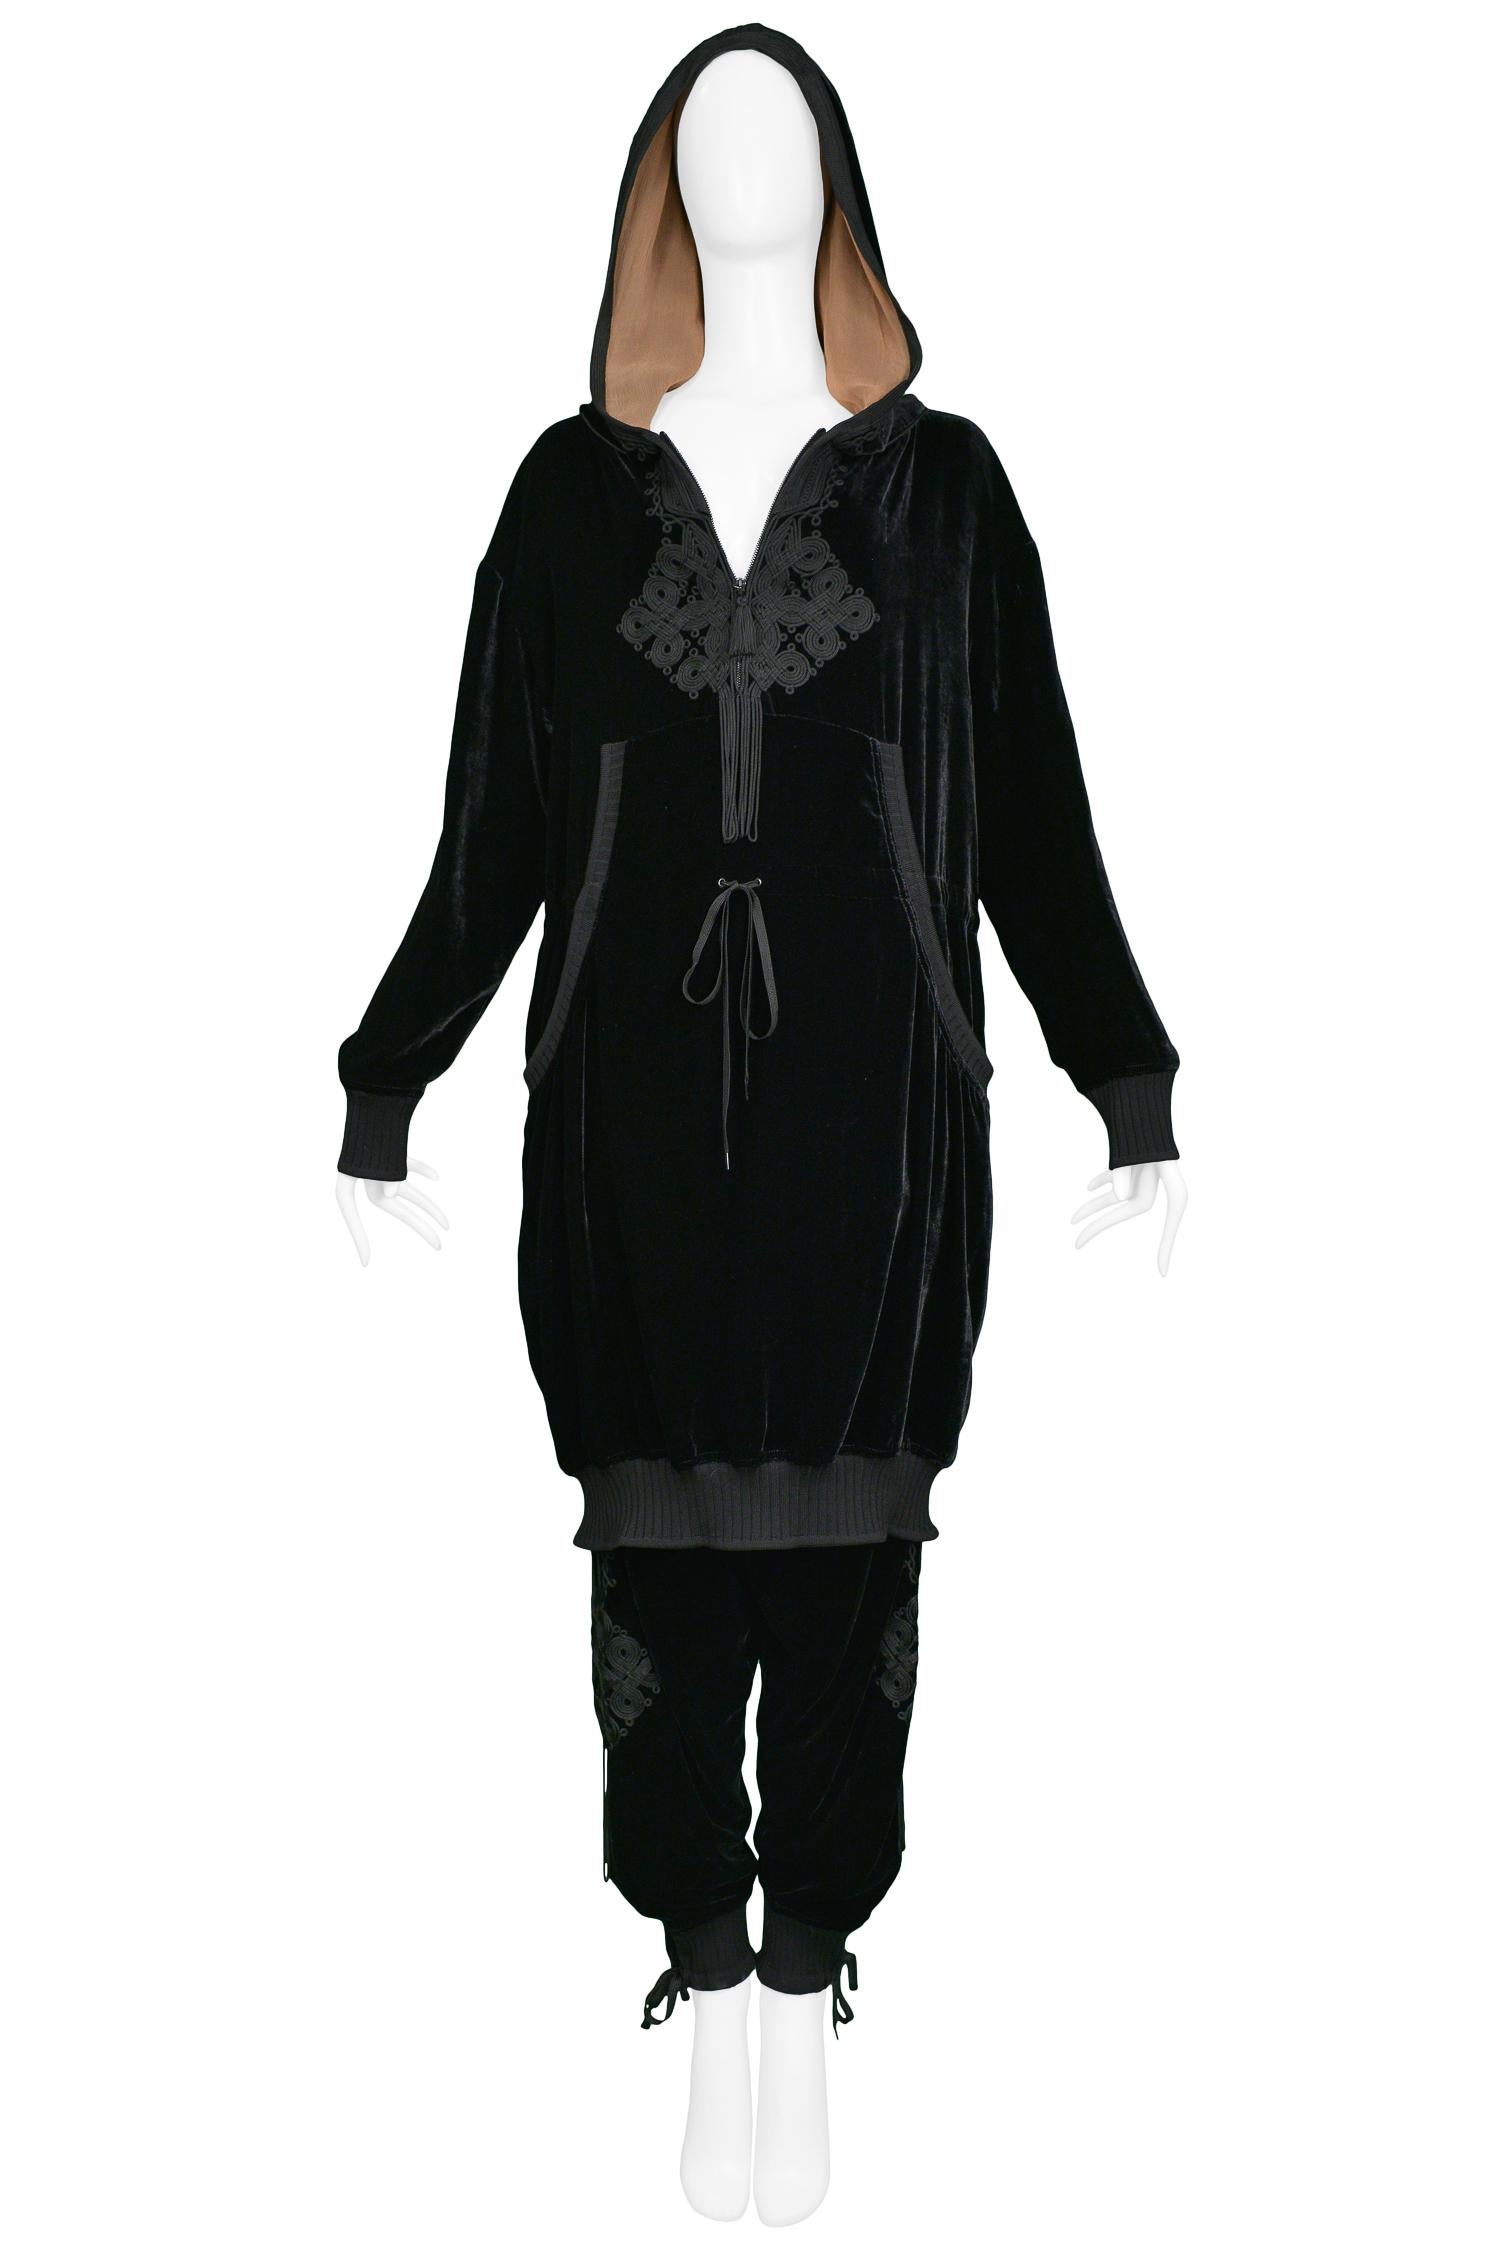 Jean Paul Gaultier black velvet long-sleeve tunic hoodie and matching track pant ensemble. Features black circular trim details and black cord geometric symbol on hoodie and cuffs. Collection AW 2010.

Excellent Condition.

Size 42